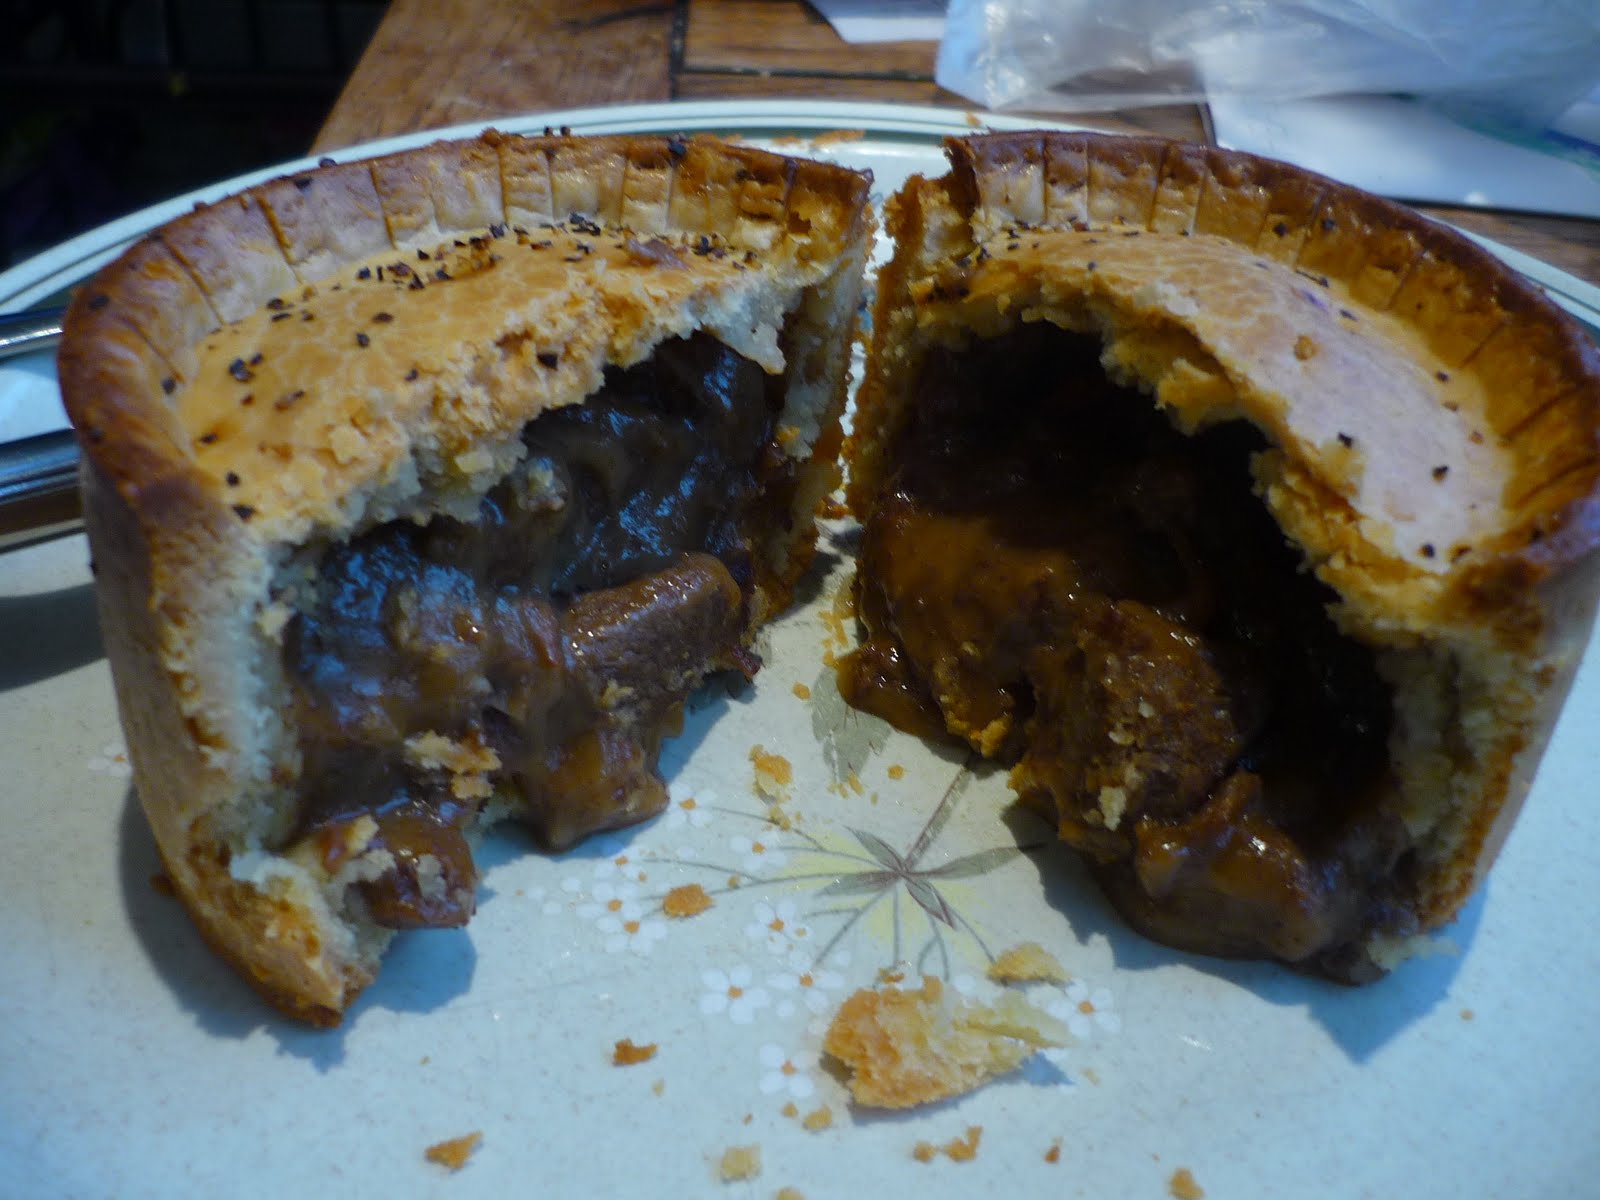 Pierate - Pie Reviews: Make no Mistake, I Ate the Great ...